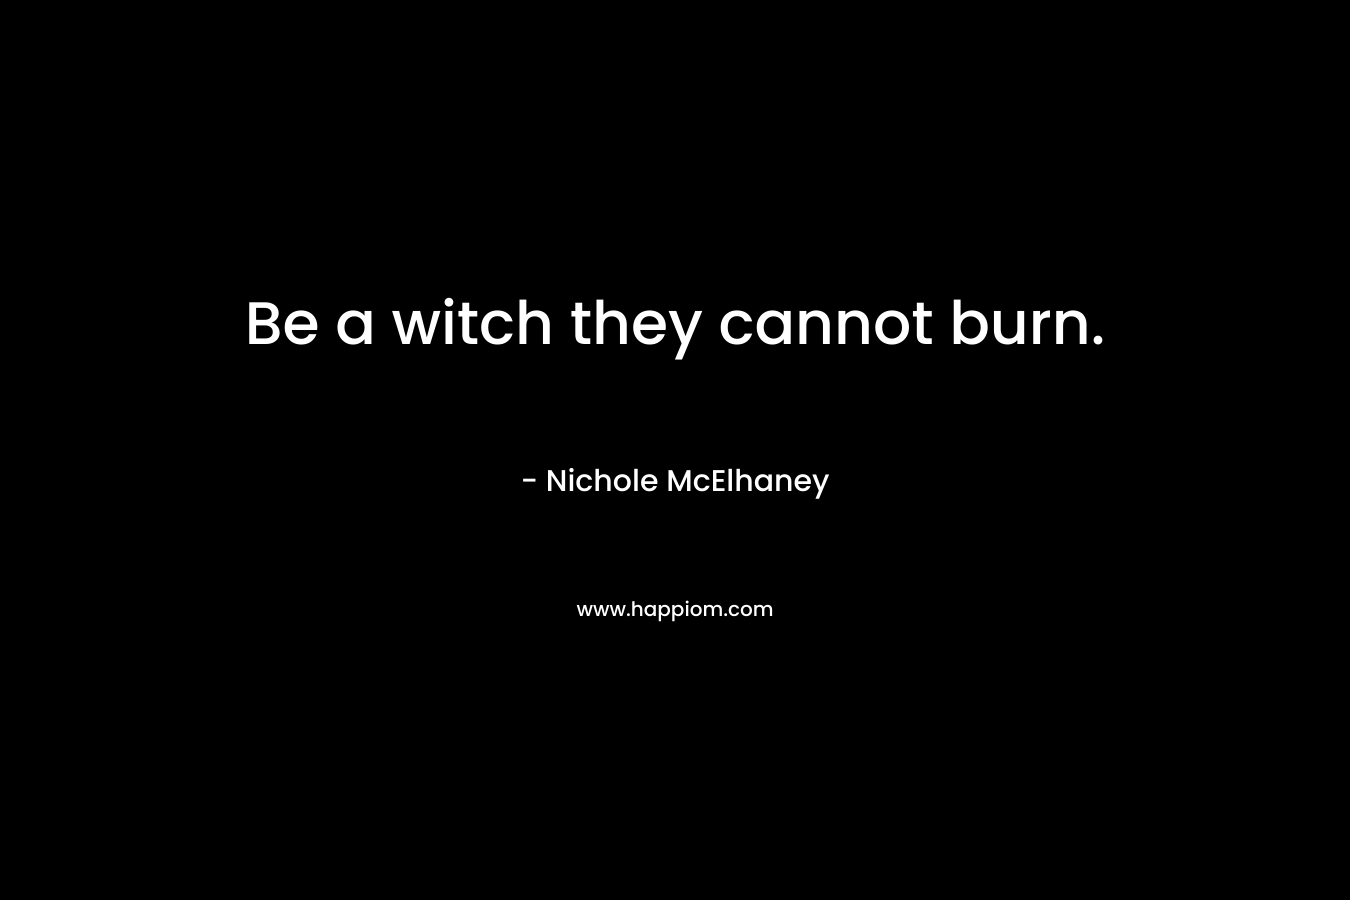 Be a witch they cannot burn. – Nichole McElhaney